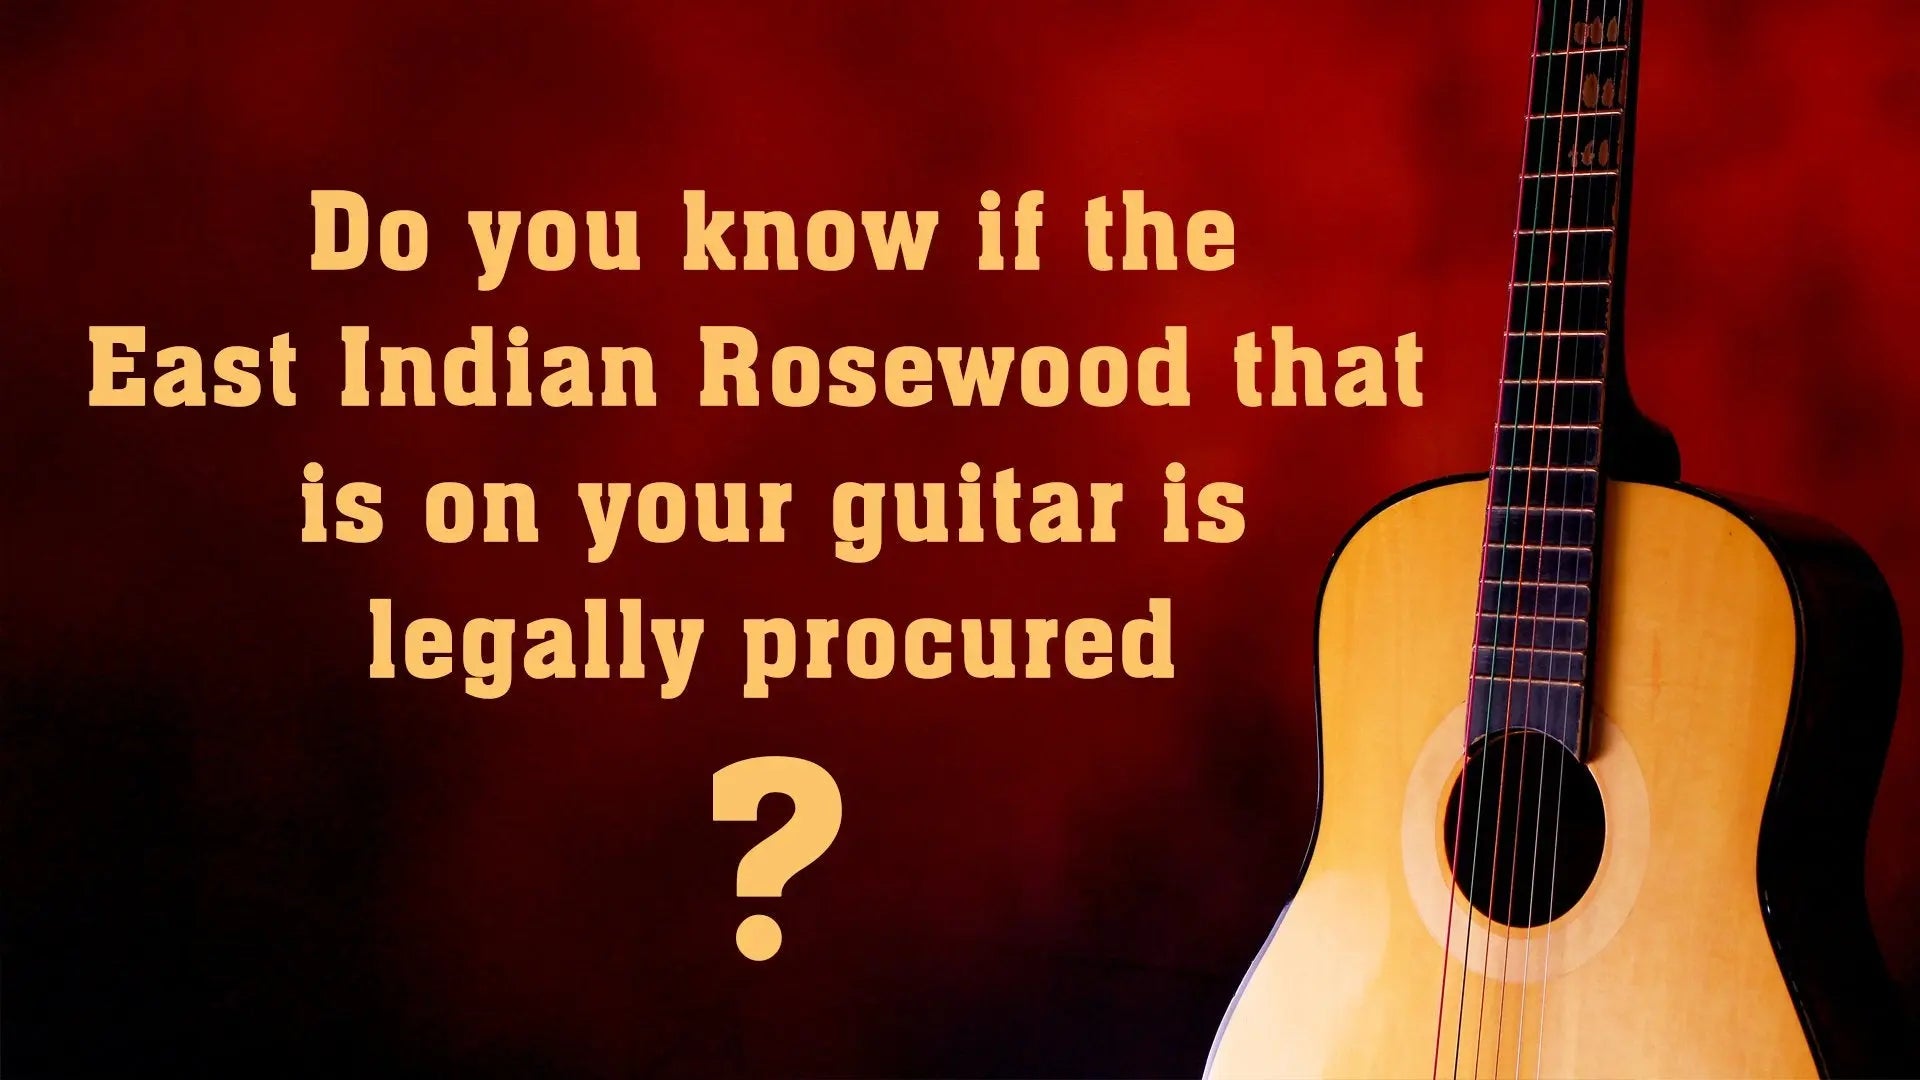 Do you know if the East Indian Rosewood that is on your guitar is legally procured?